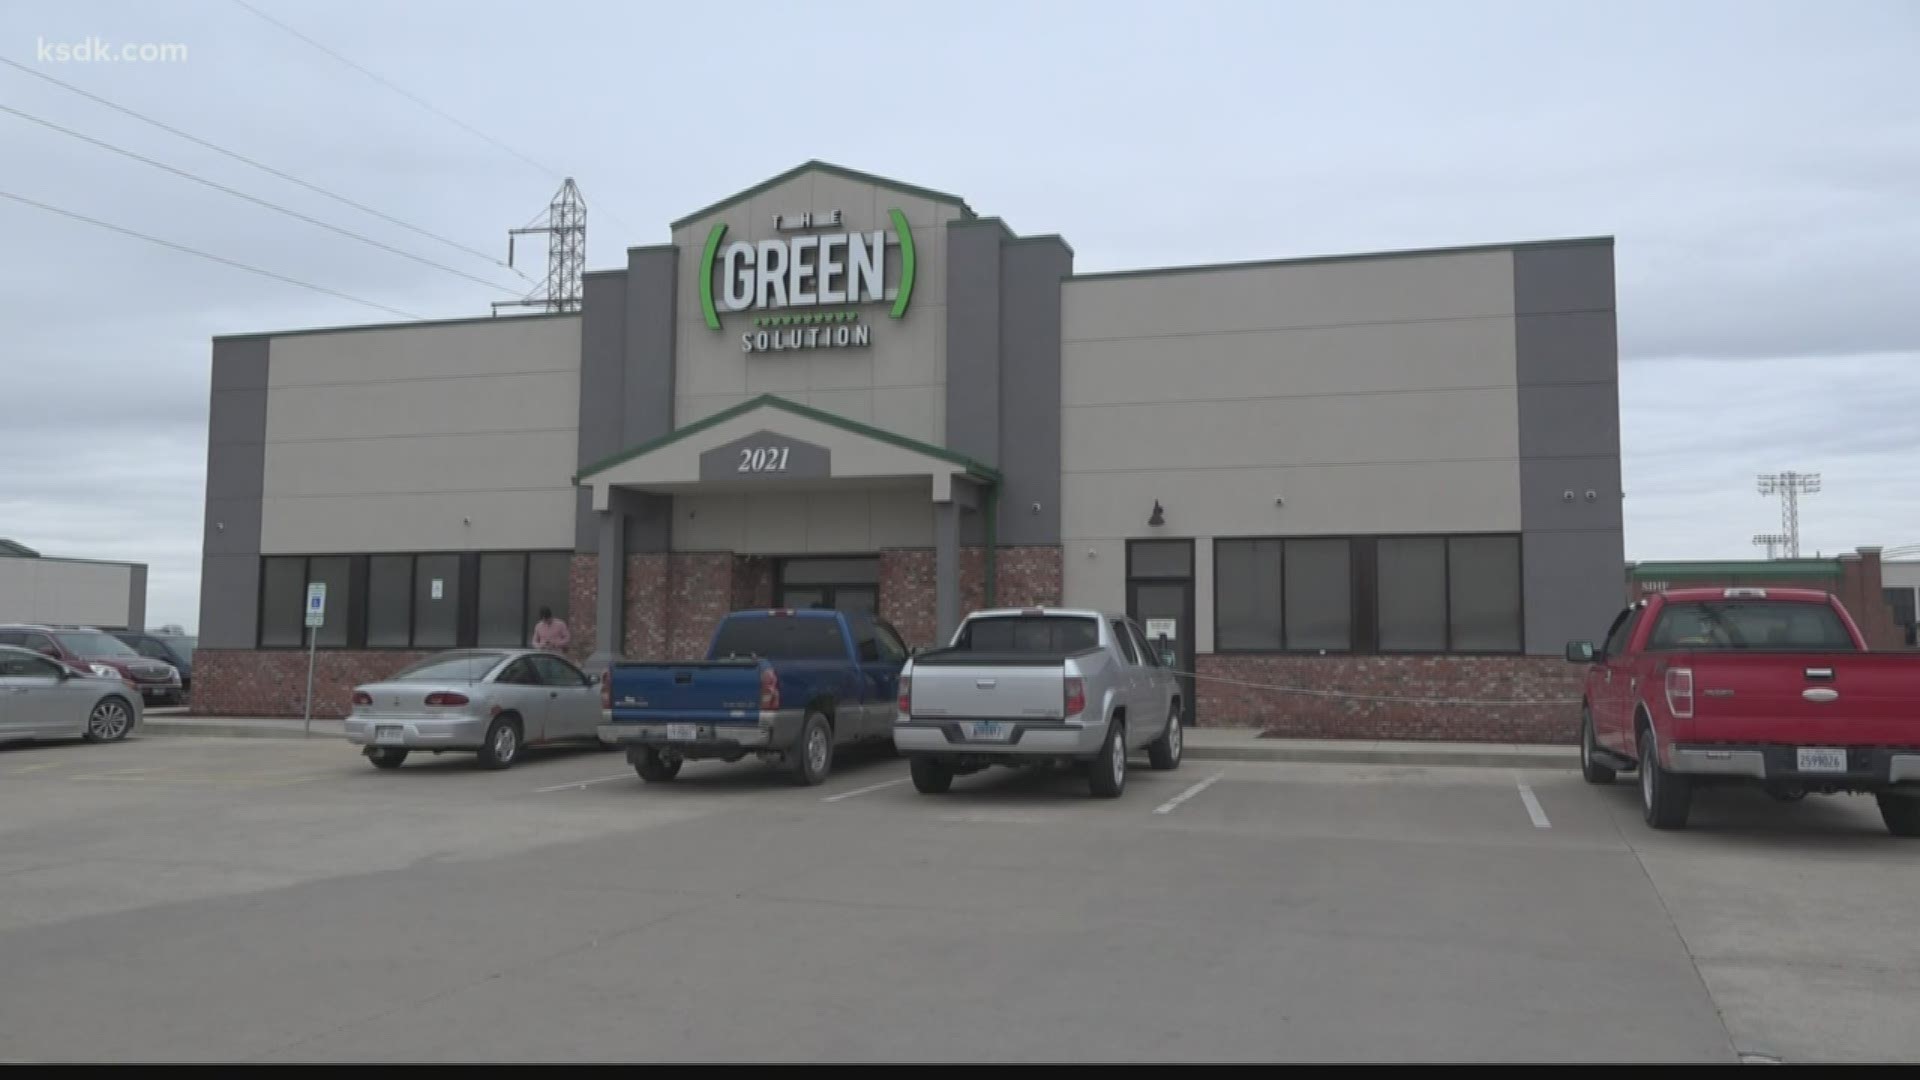 The Green Solution in Sauget began selling adult-use cannabis at 9 a.m.